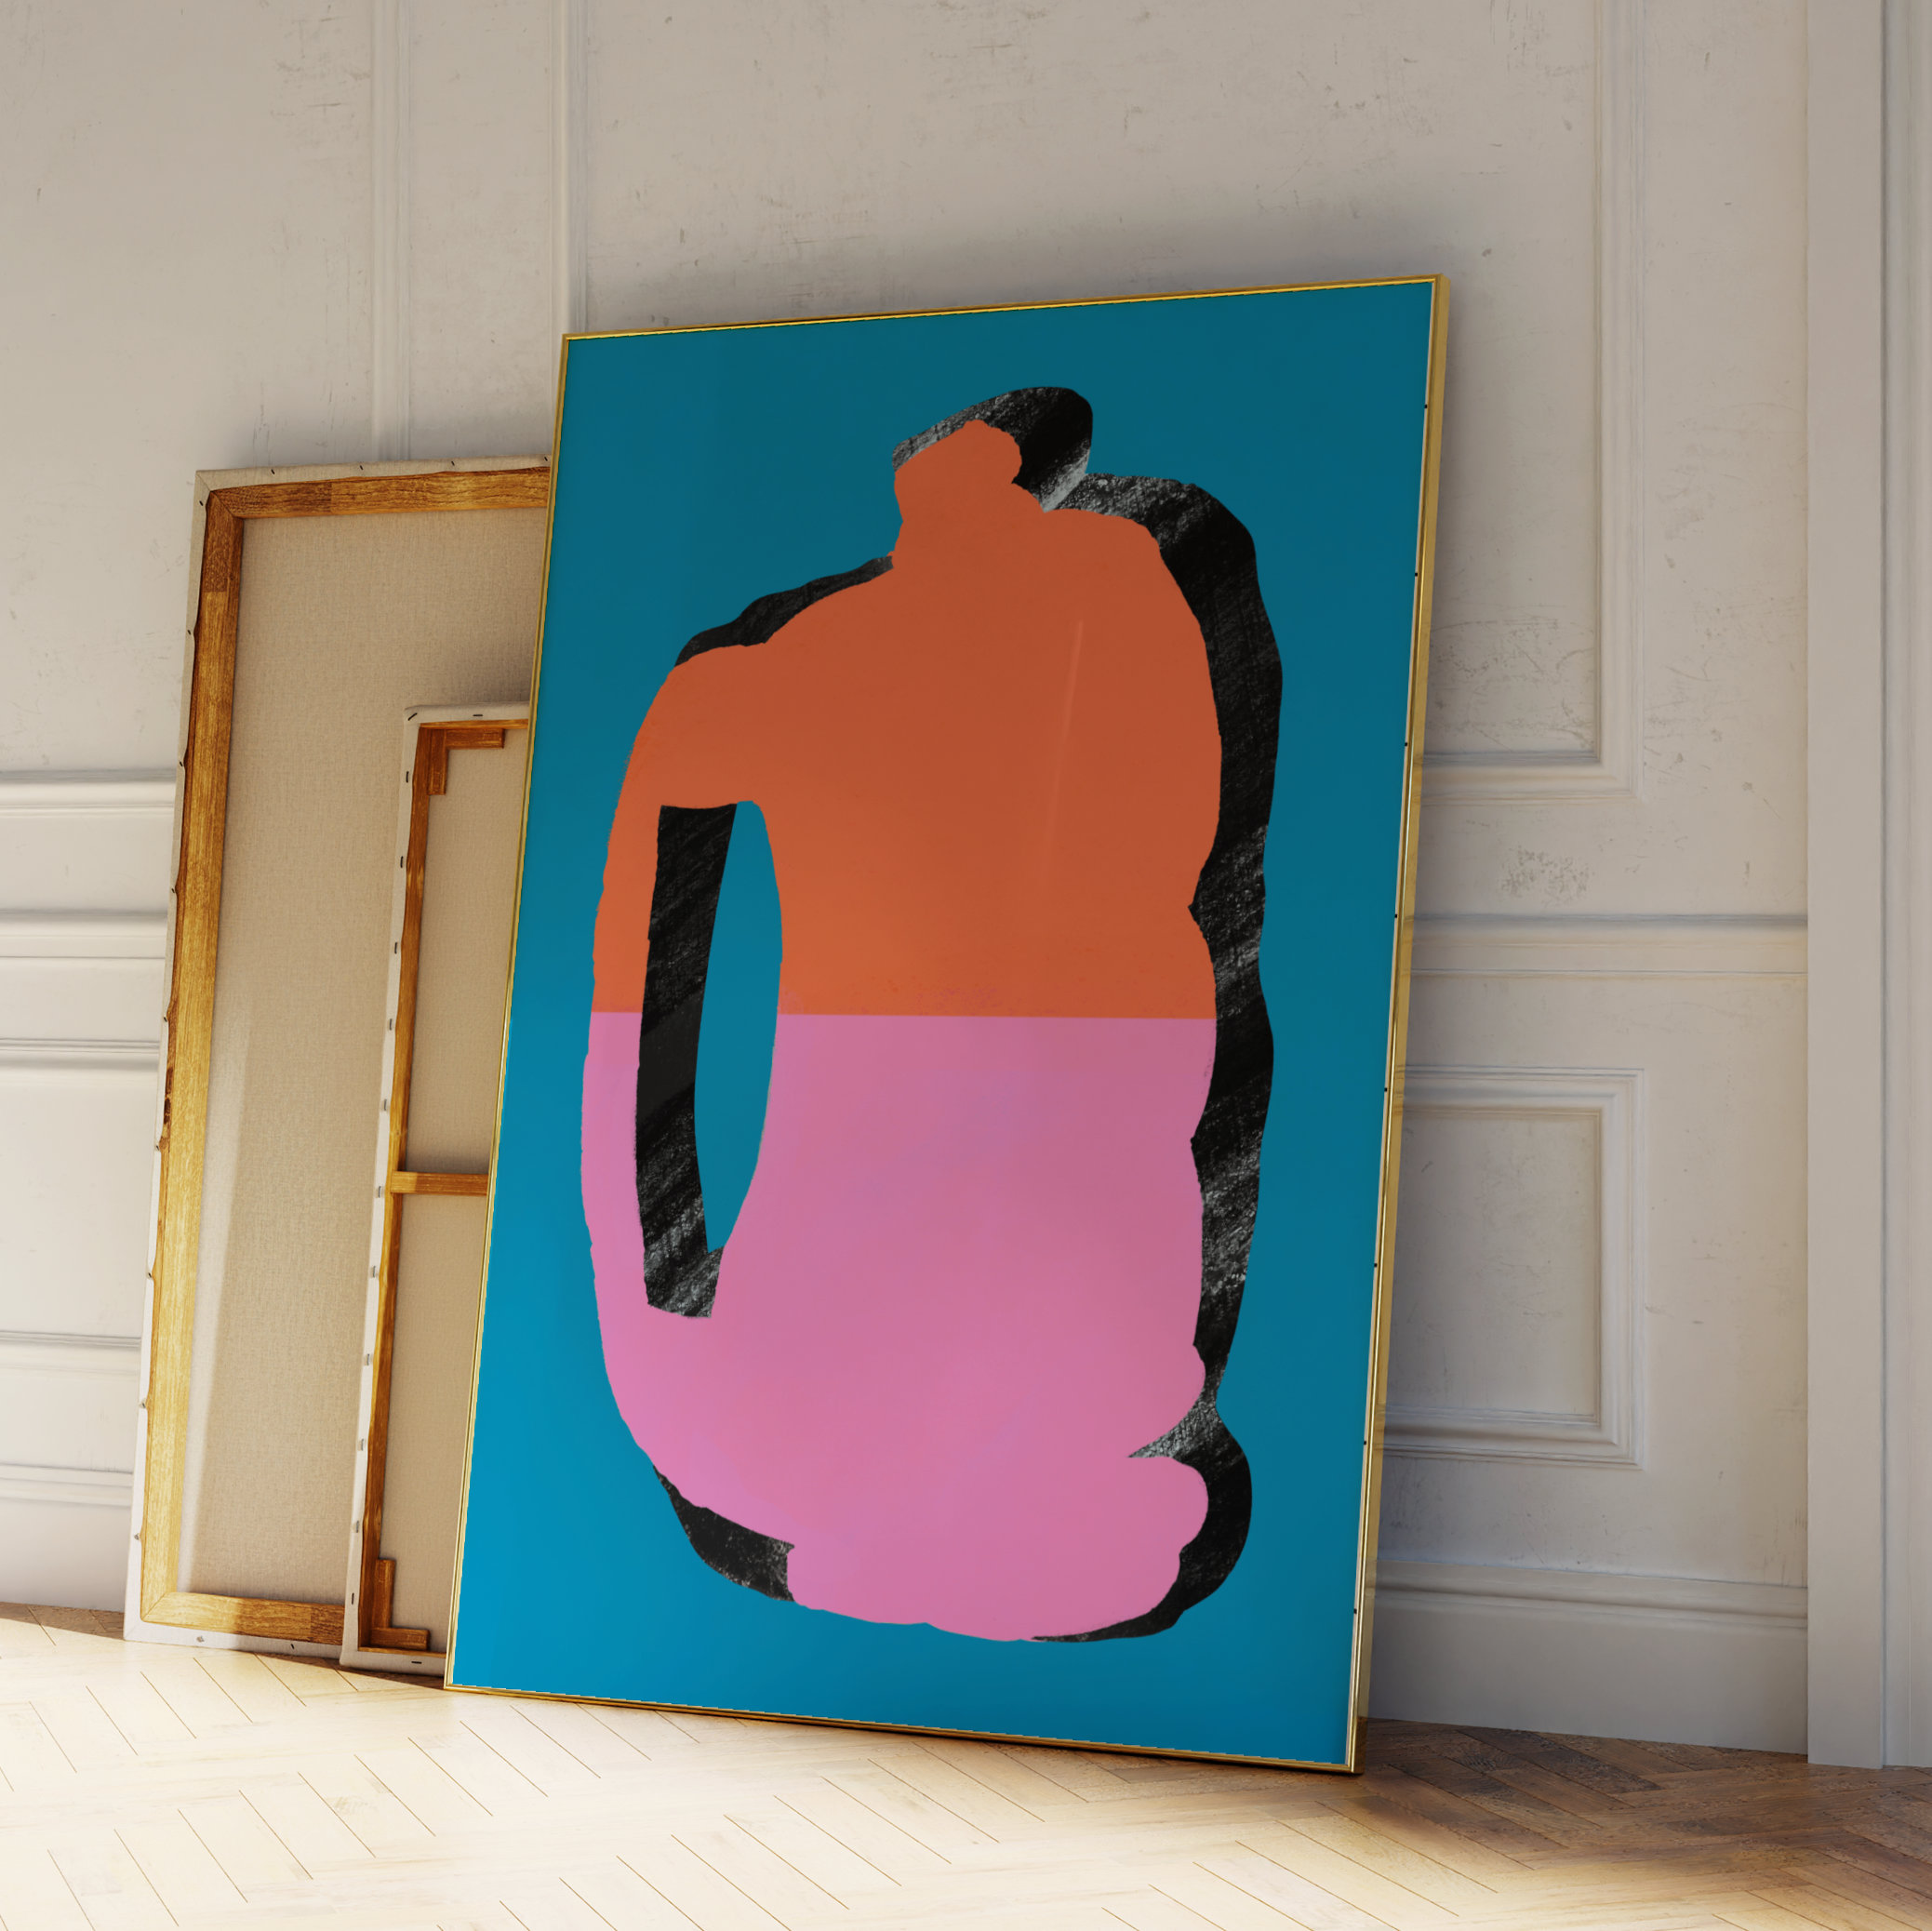 Photograph of Health Bottle, abstract graphic poster designed by Lena Robin